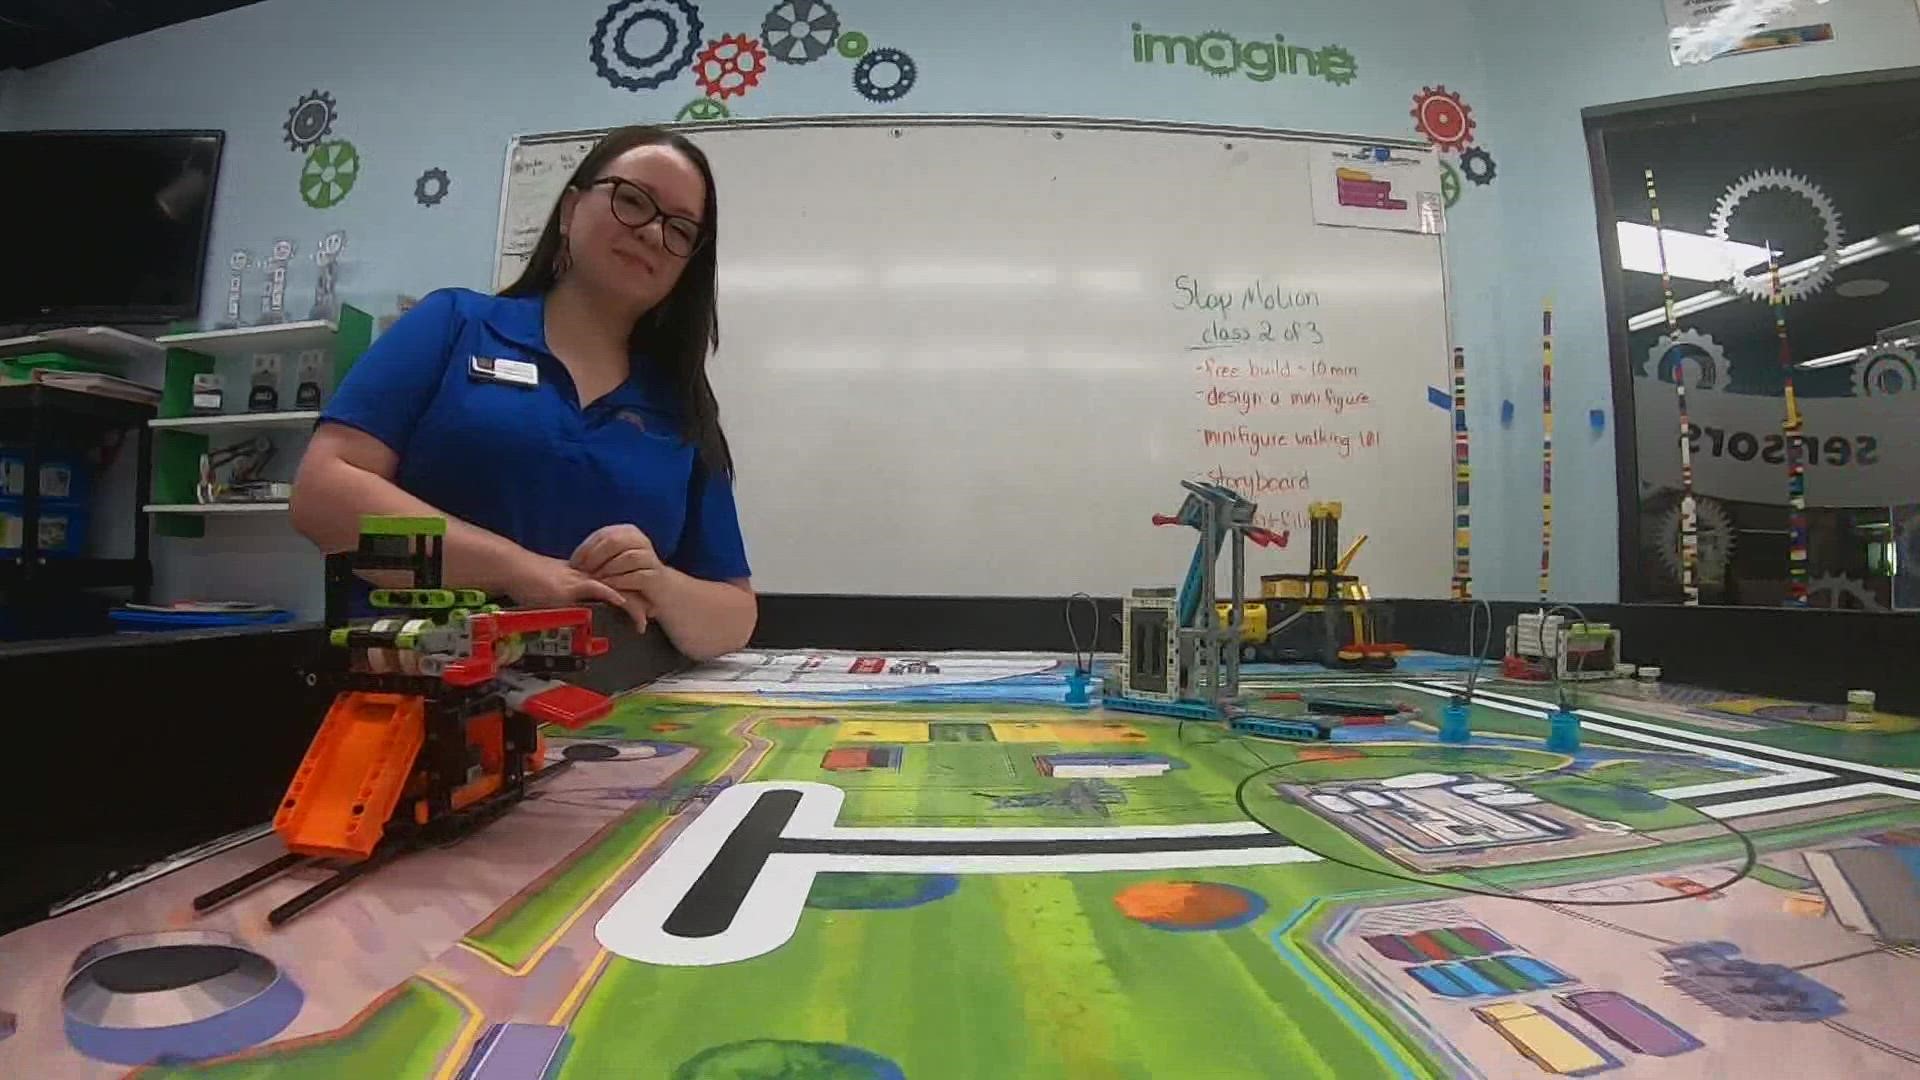 Jessica Linkletter combines plastic toys and innovation to make science fun for all ages.